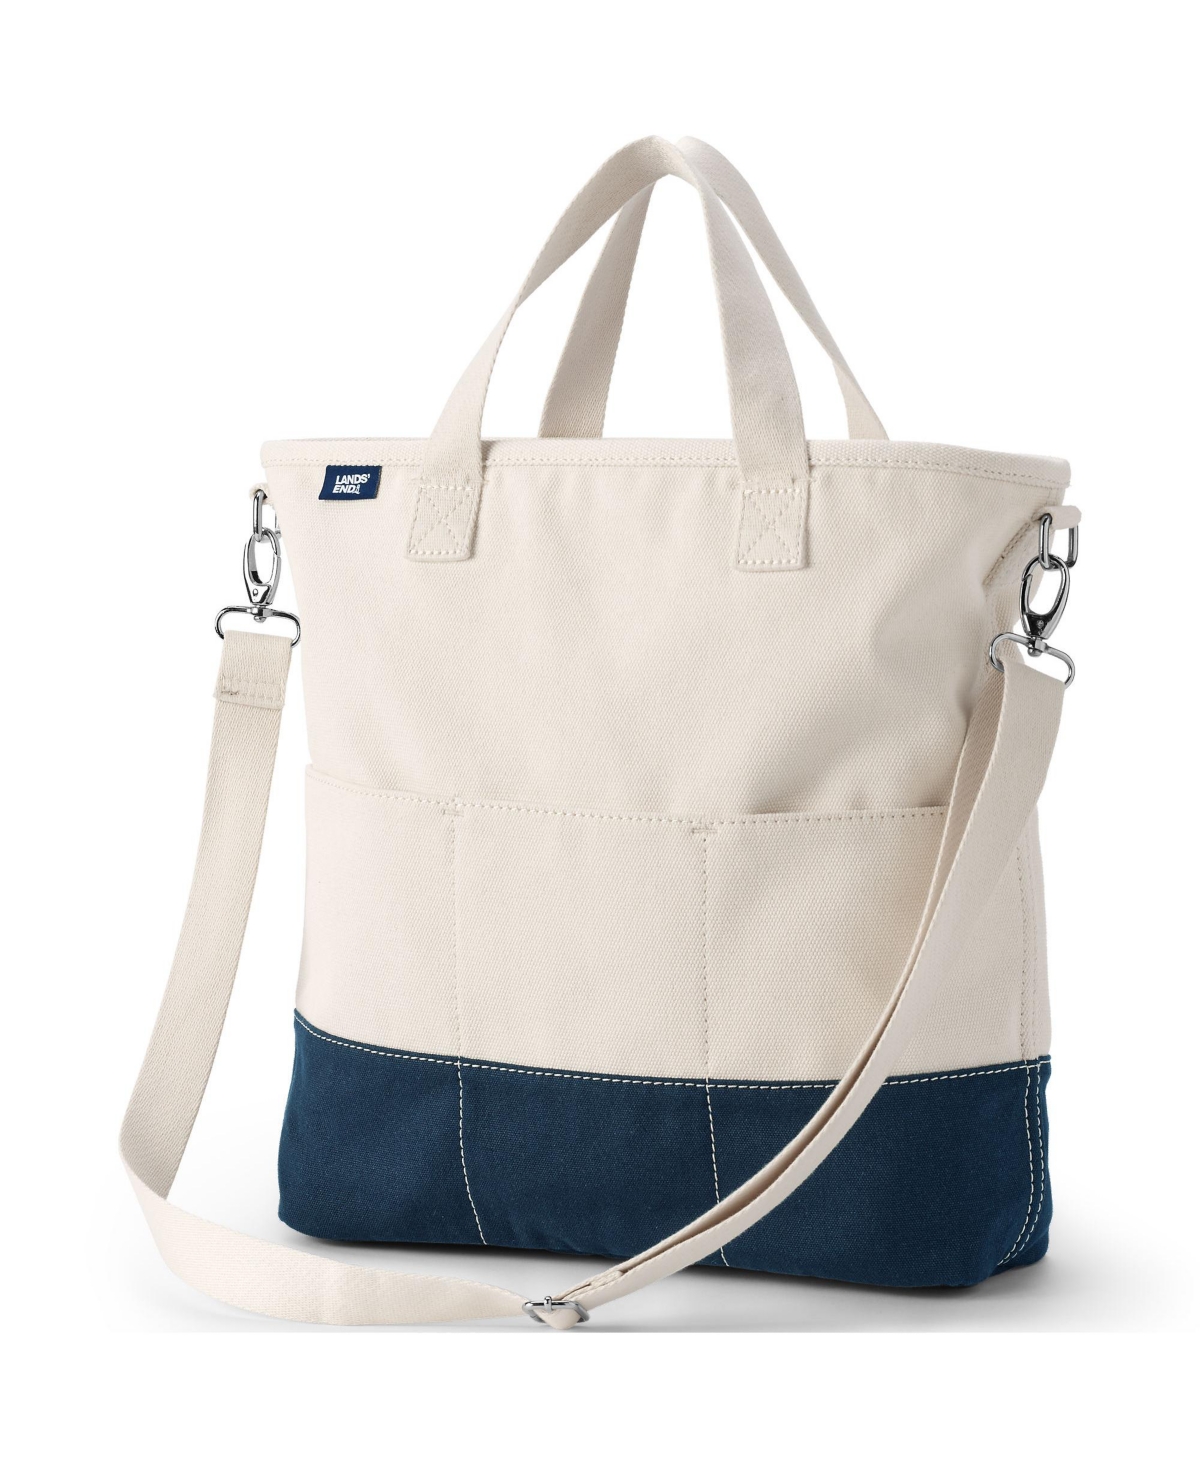 Inside Out Canvas Tote - Radiant navy wide stripe